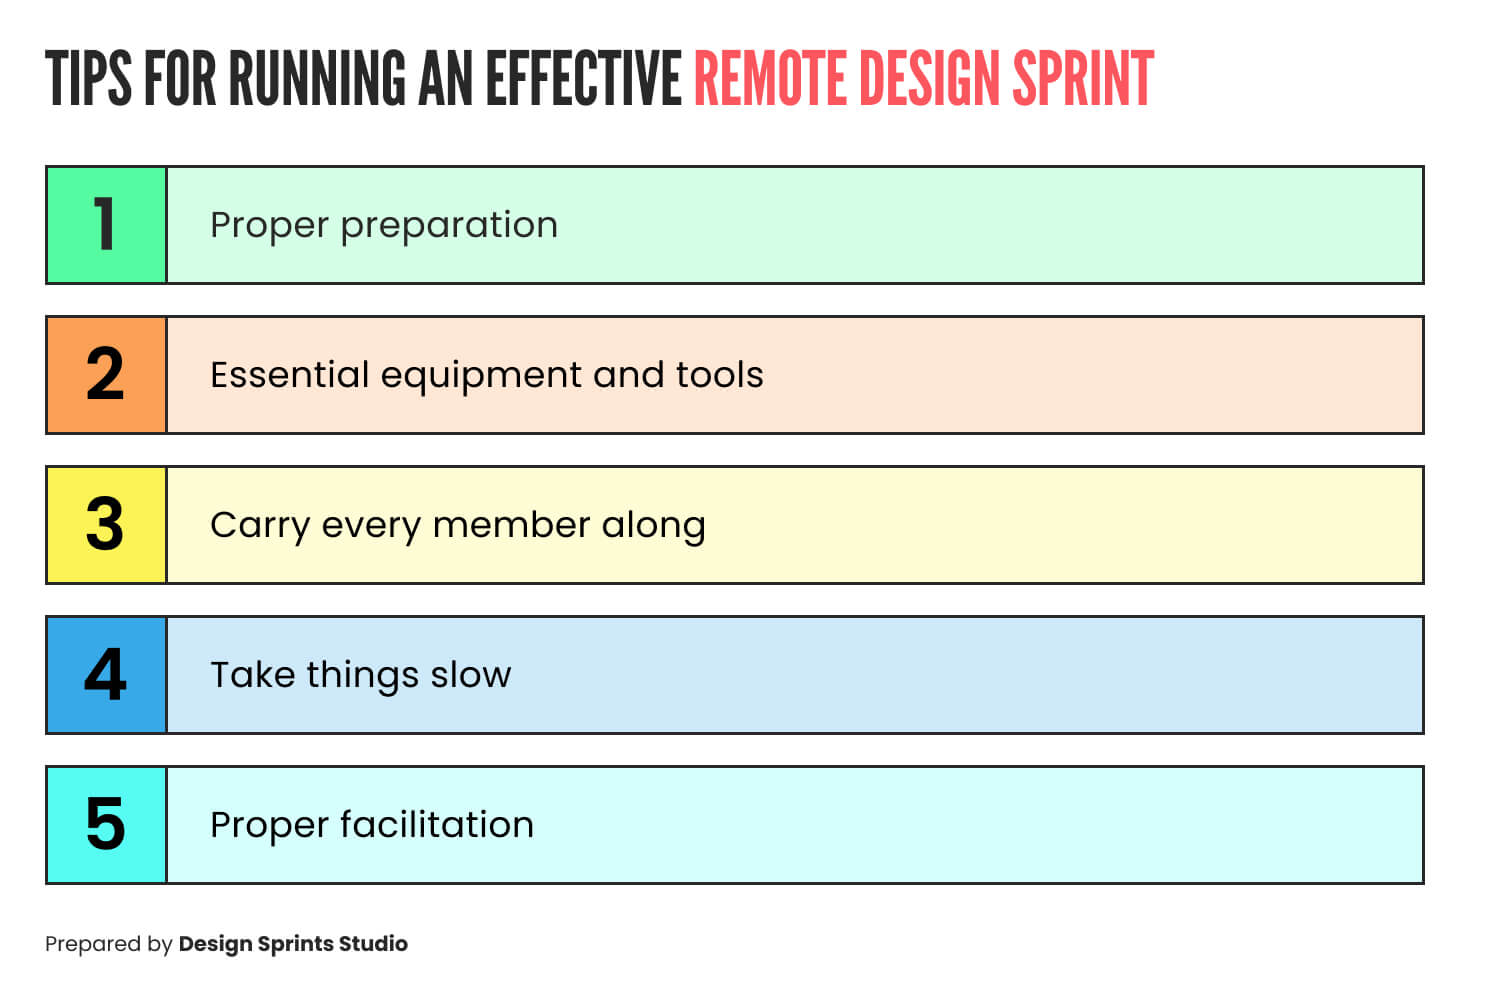 Tips for Running an Effective Remote Design Sprint